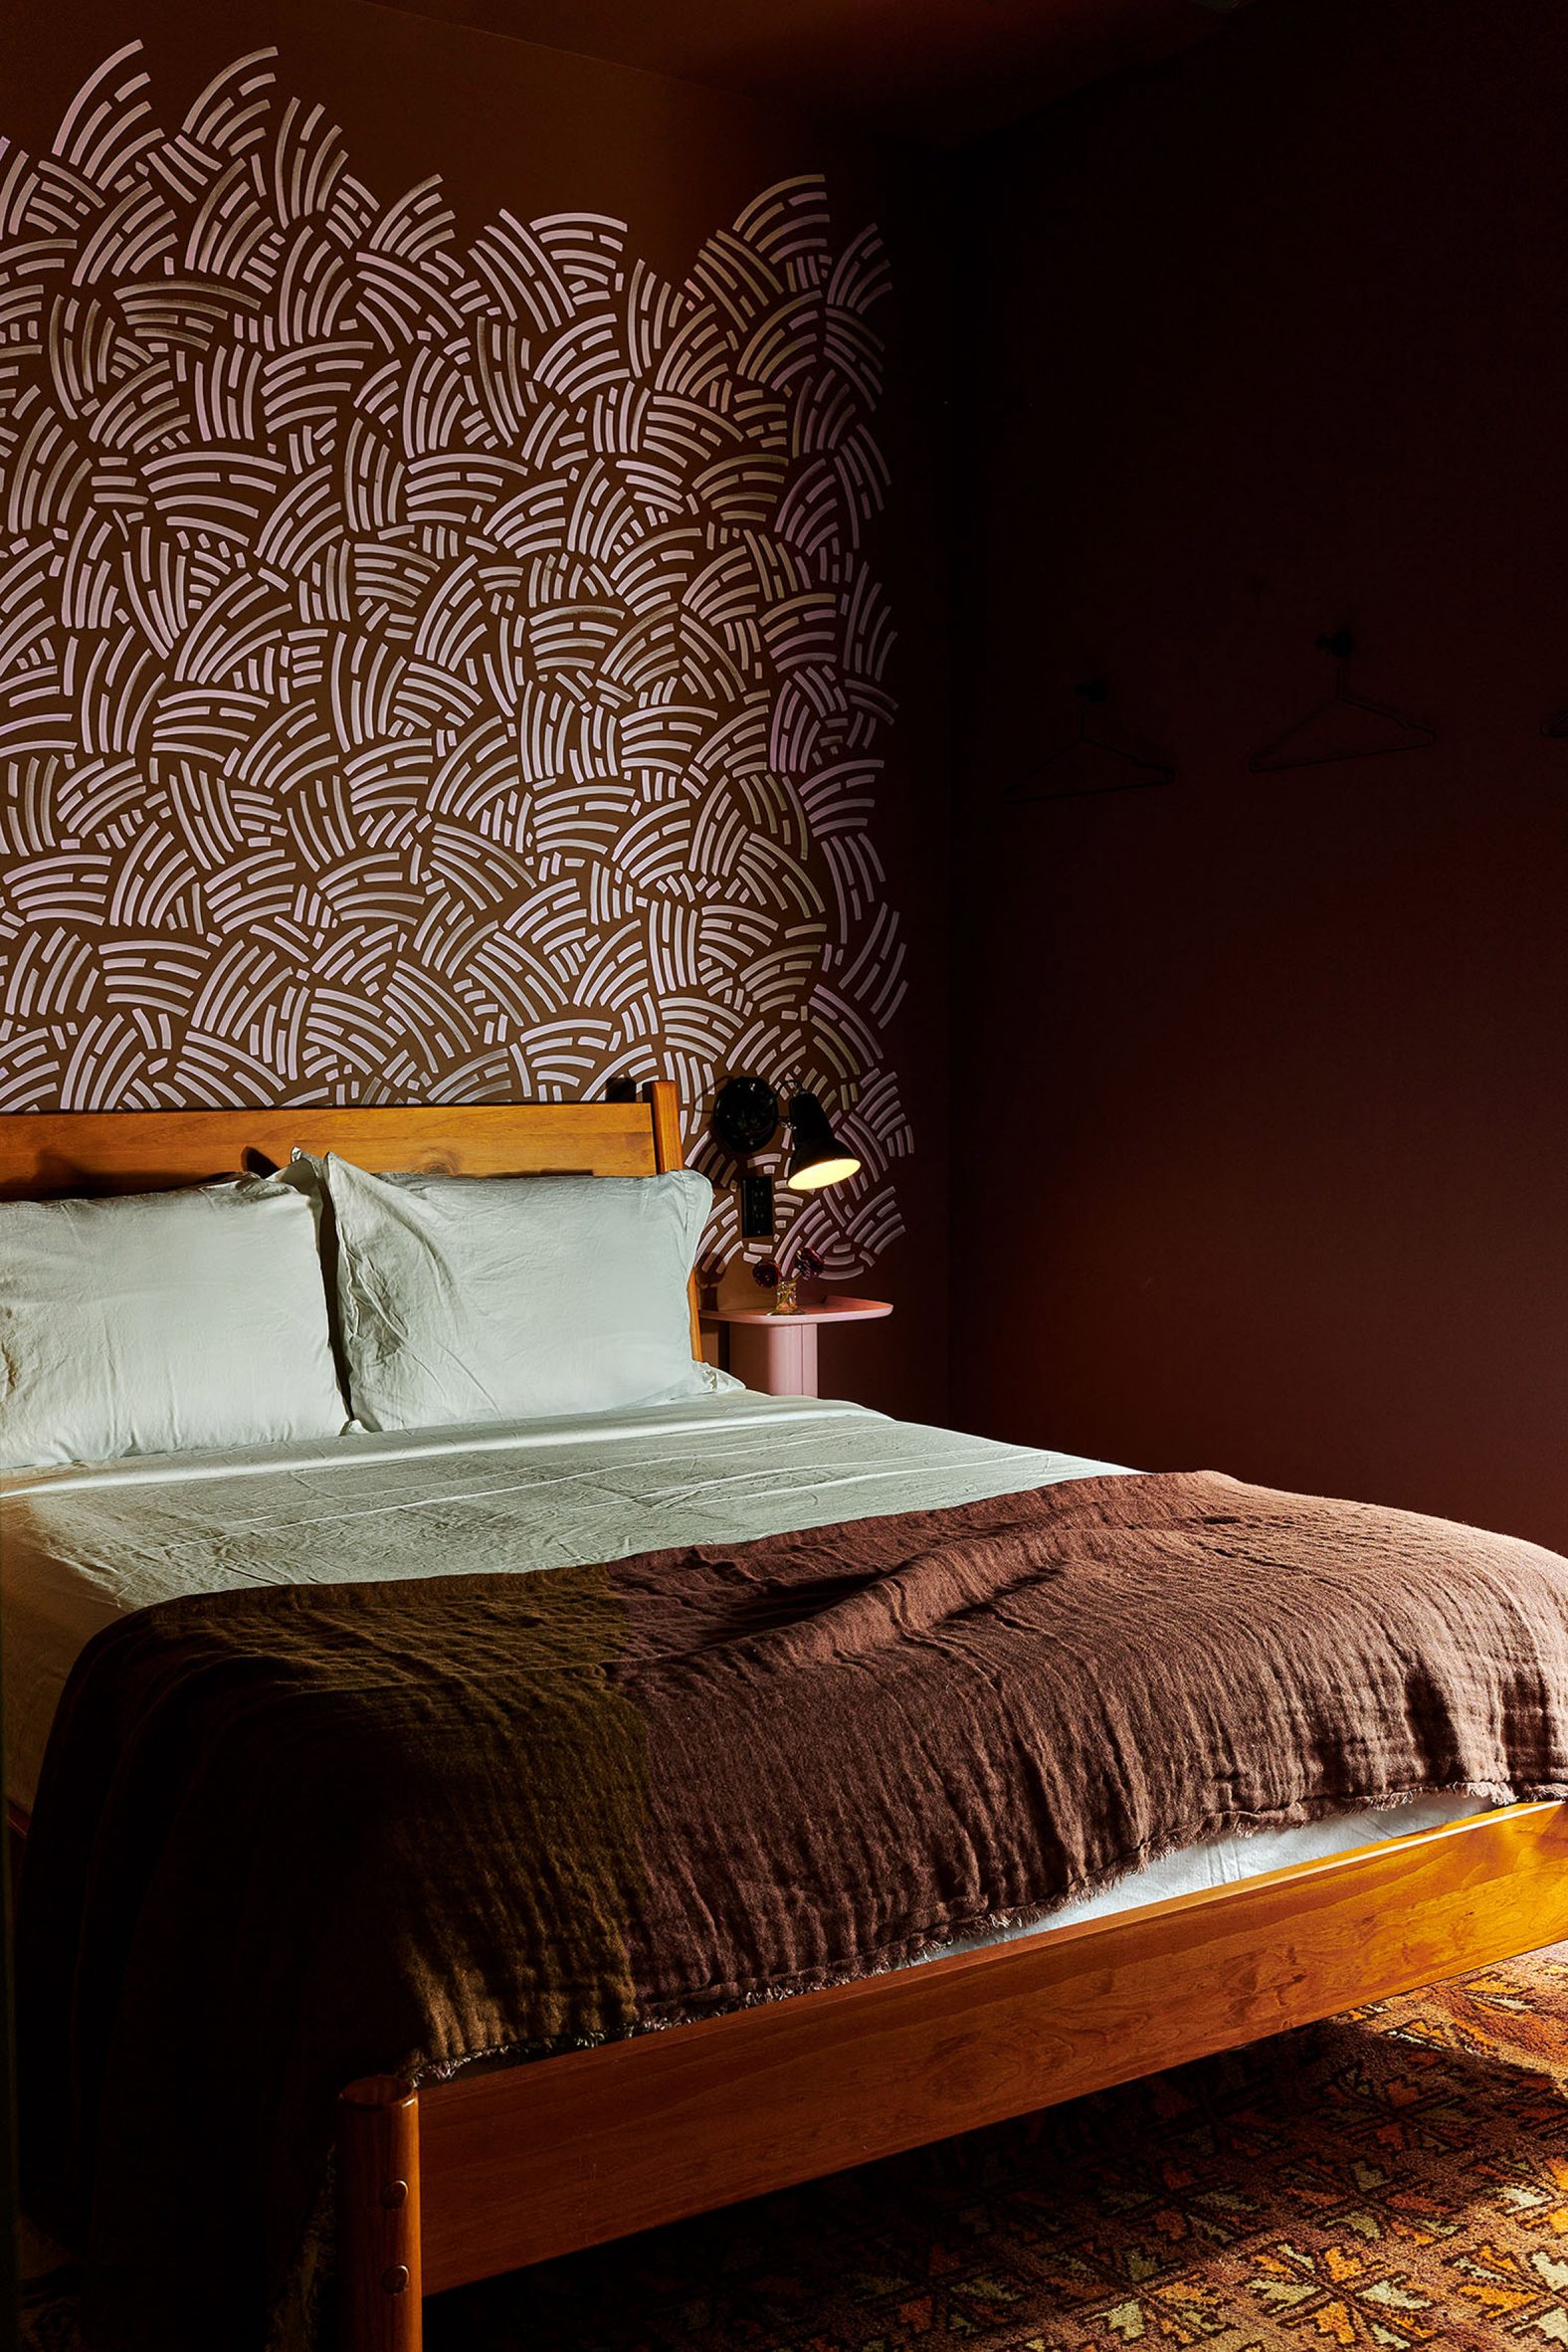 Dark red bedroom with a hand-drawn mural